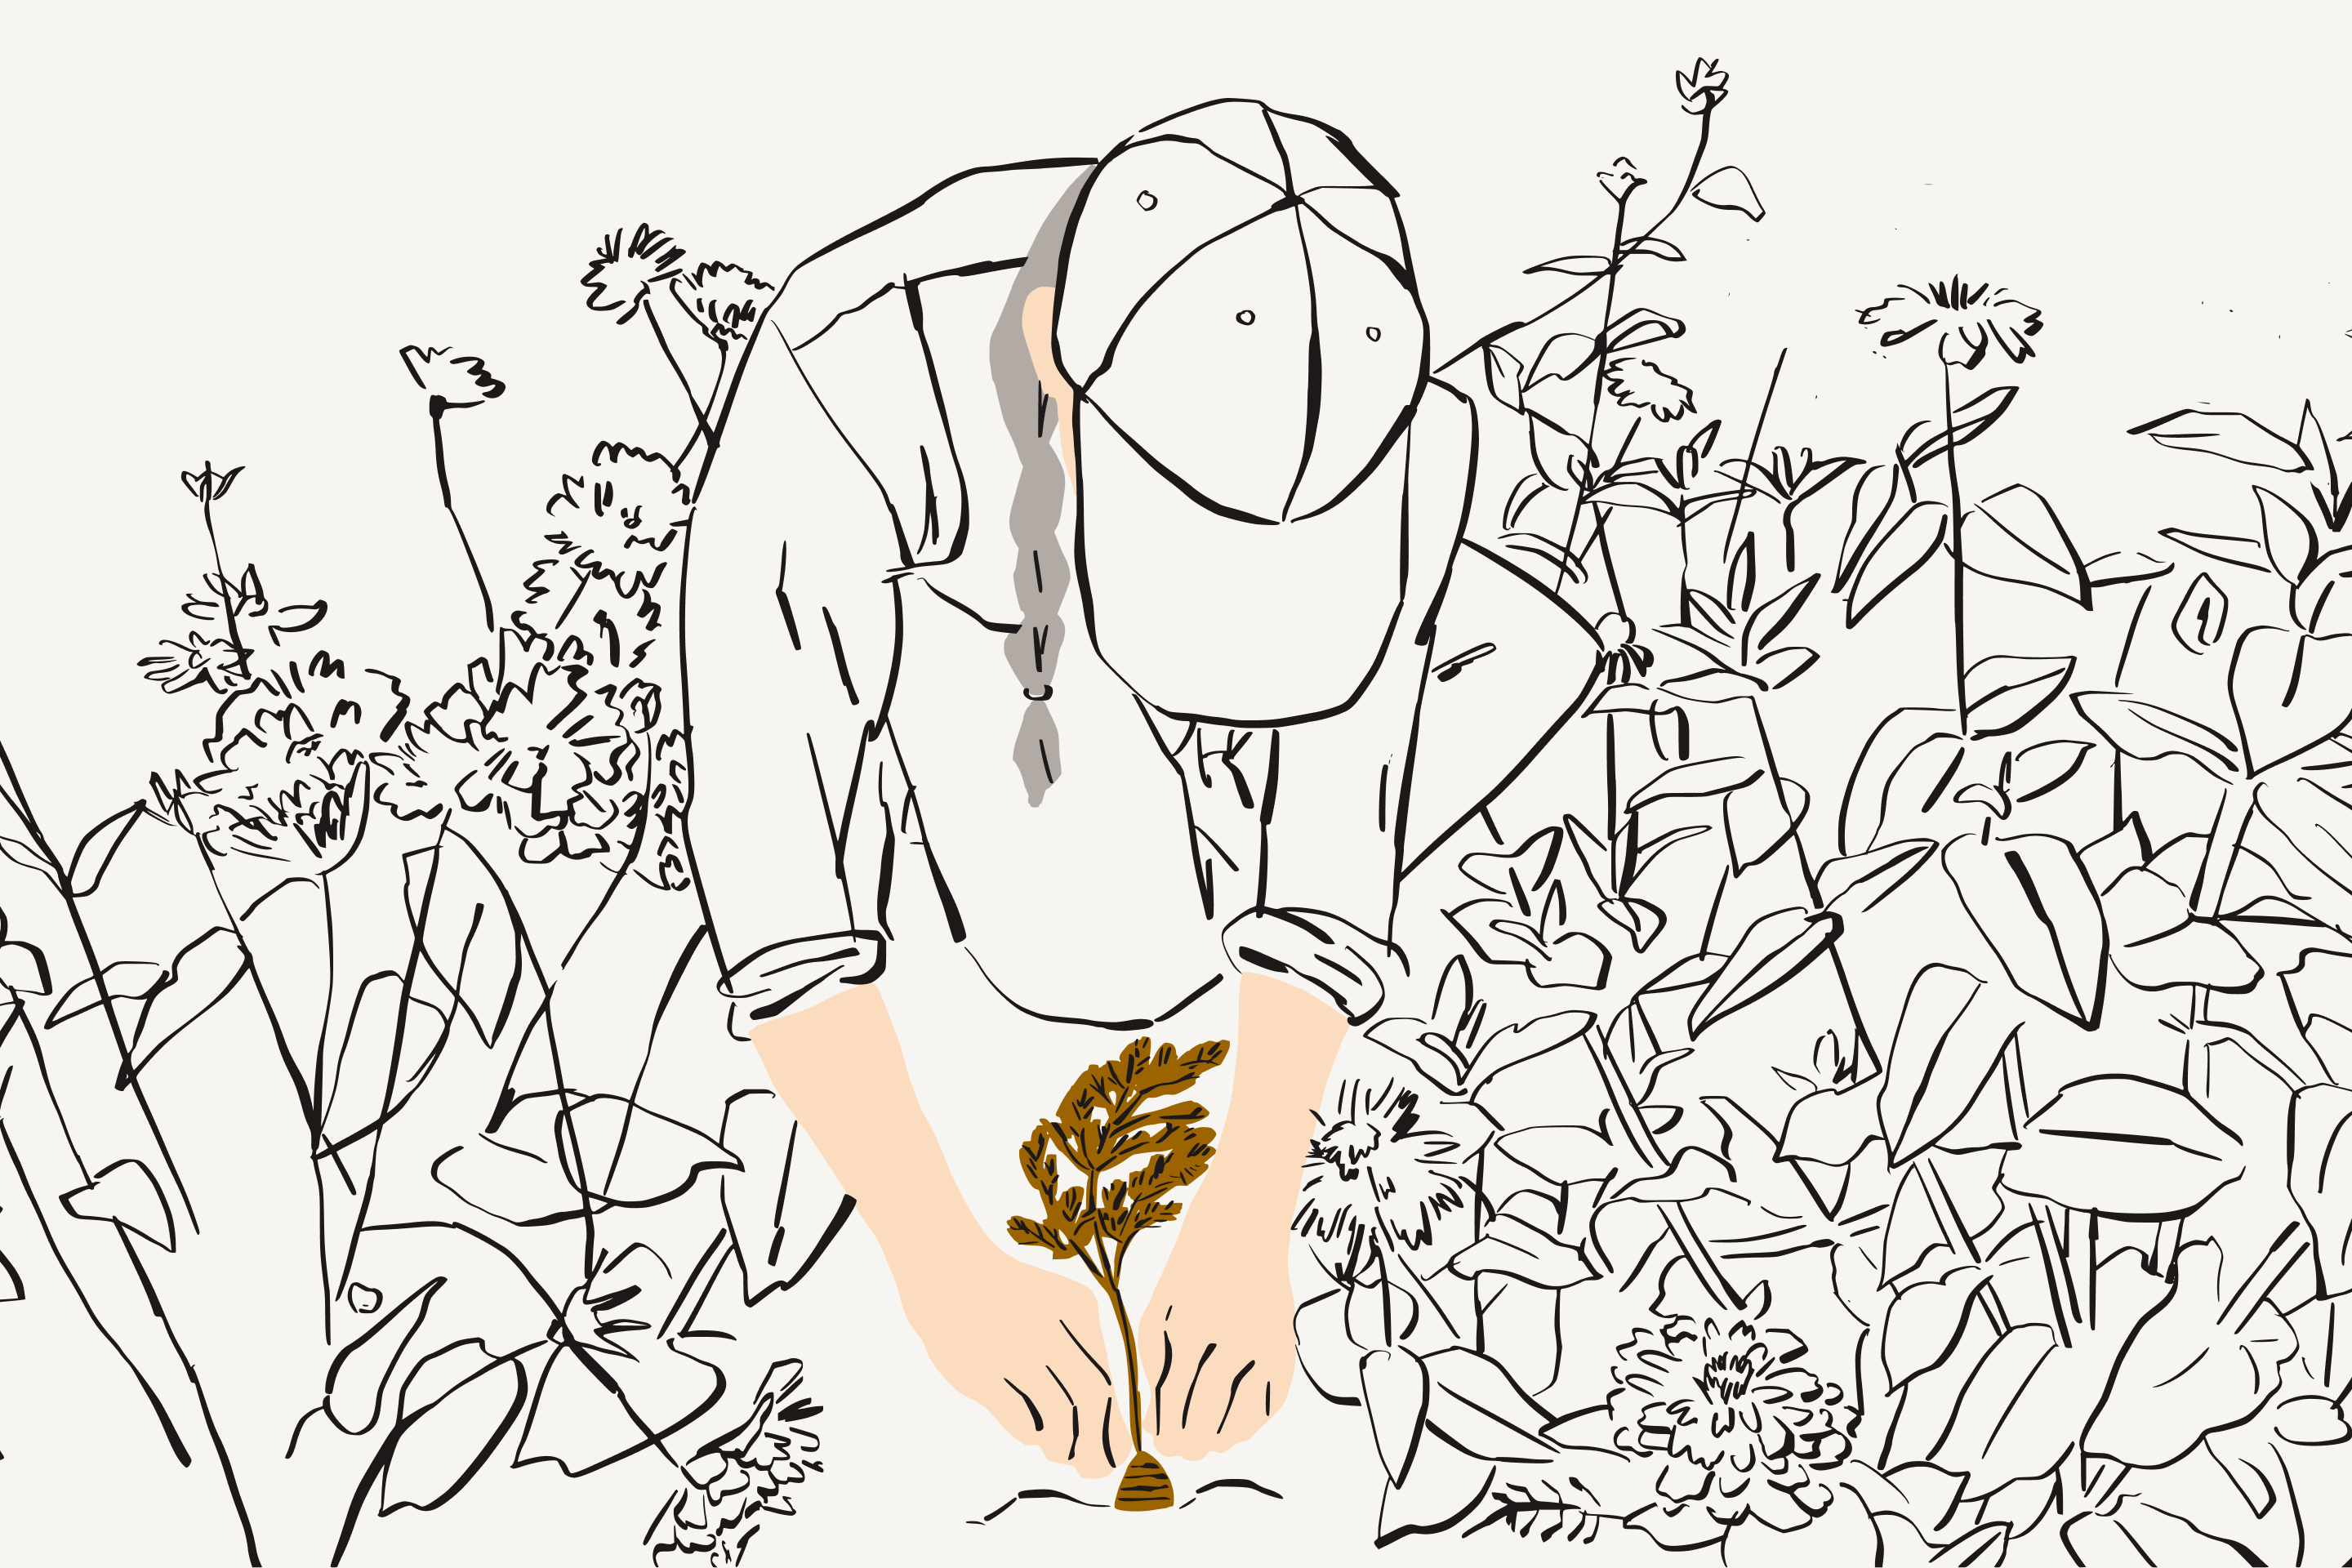 Illustration showing a woman surrounded by foliage and planting a root vegetable